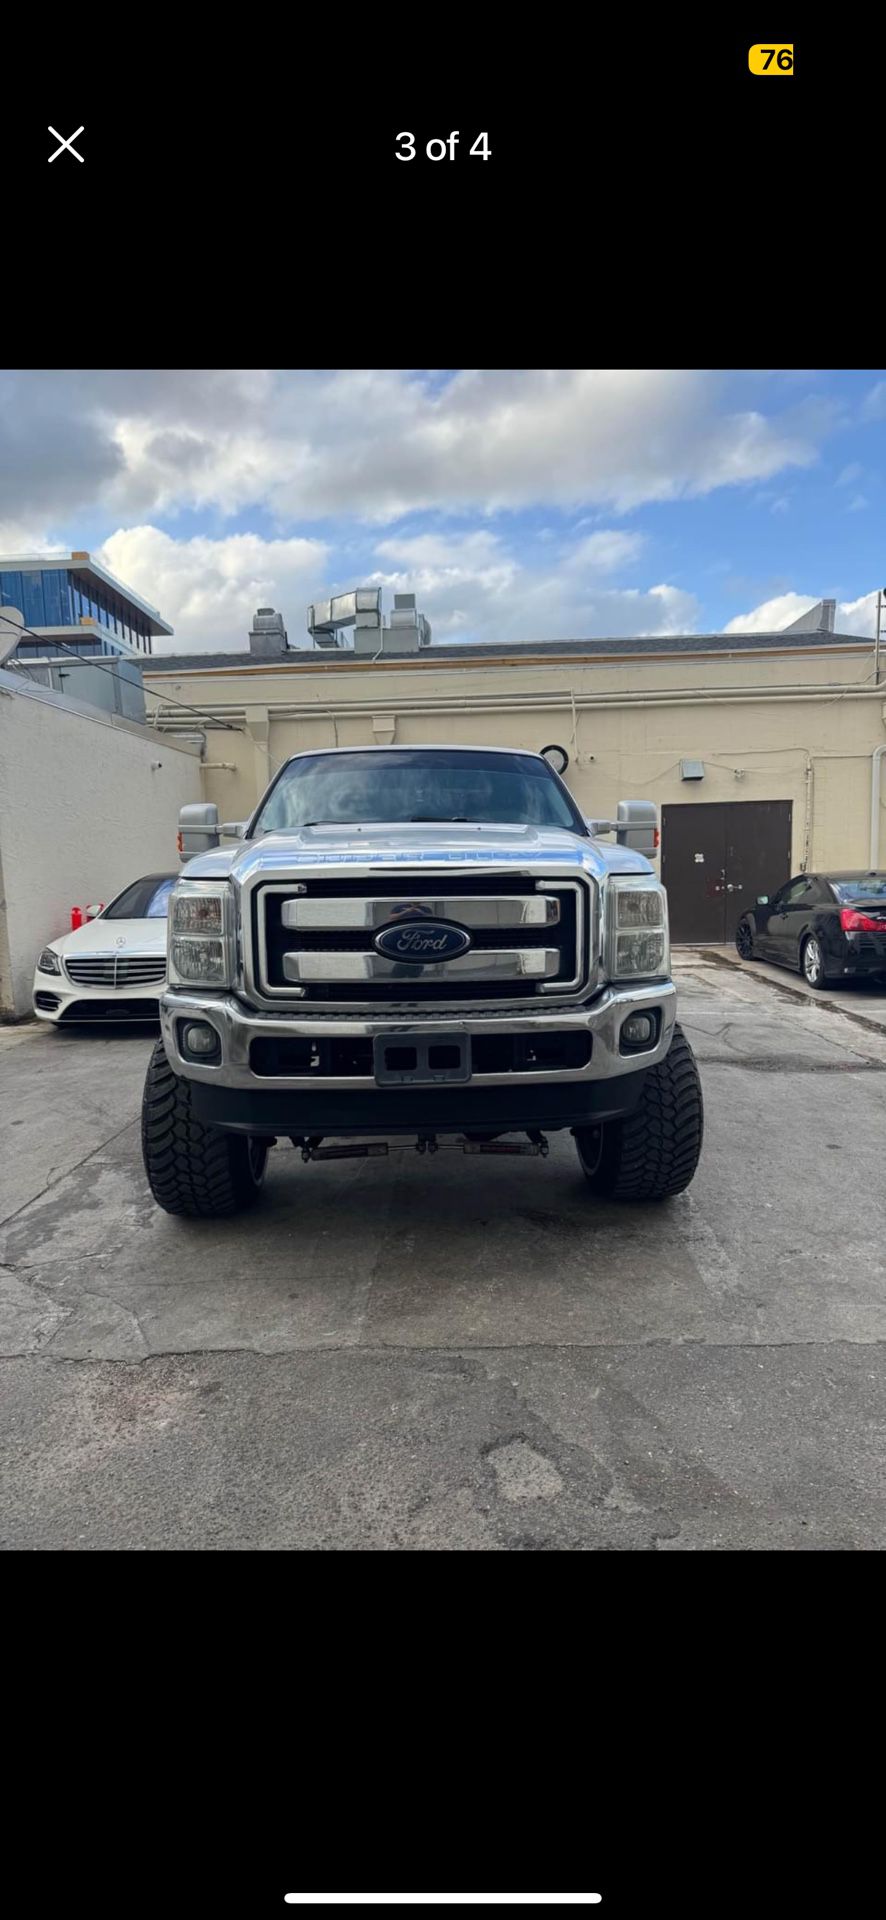 2001 F250 W 2016 Front End Conversion  Tuned, New Stage 3 Transmission, Krypto Hubs Etc, And Interior. 24x16” American Forces, New Tires. 18,500 FIRM